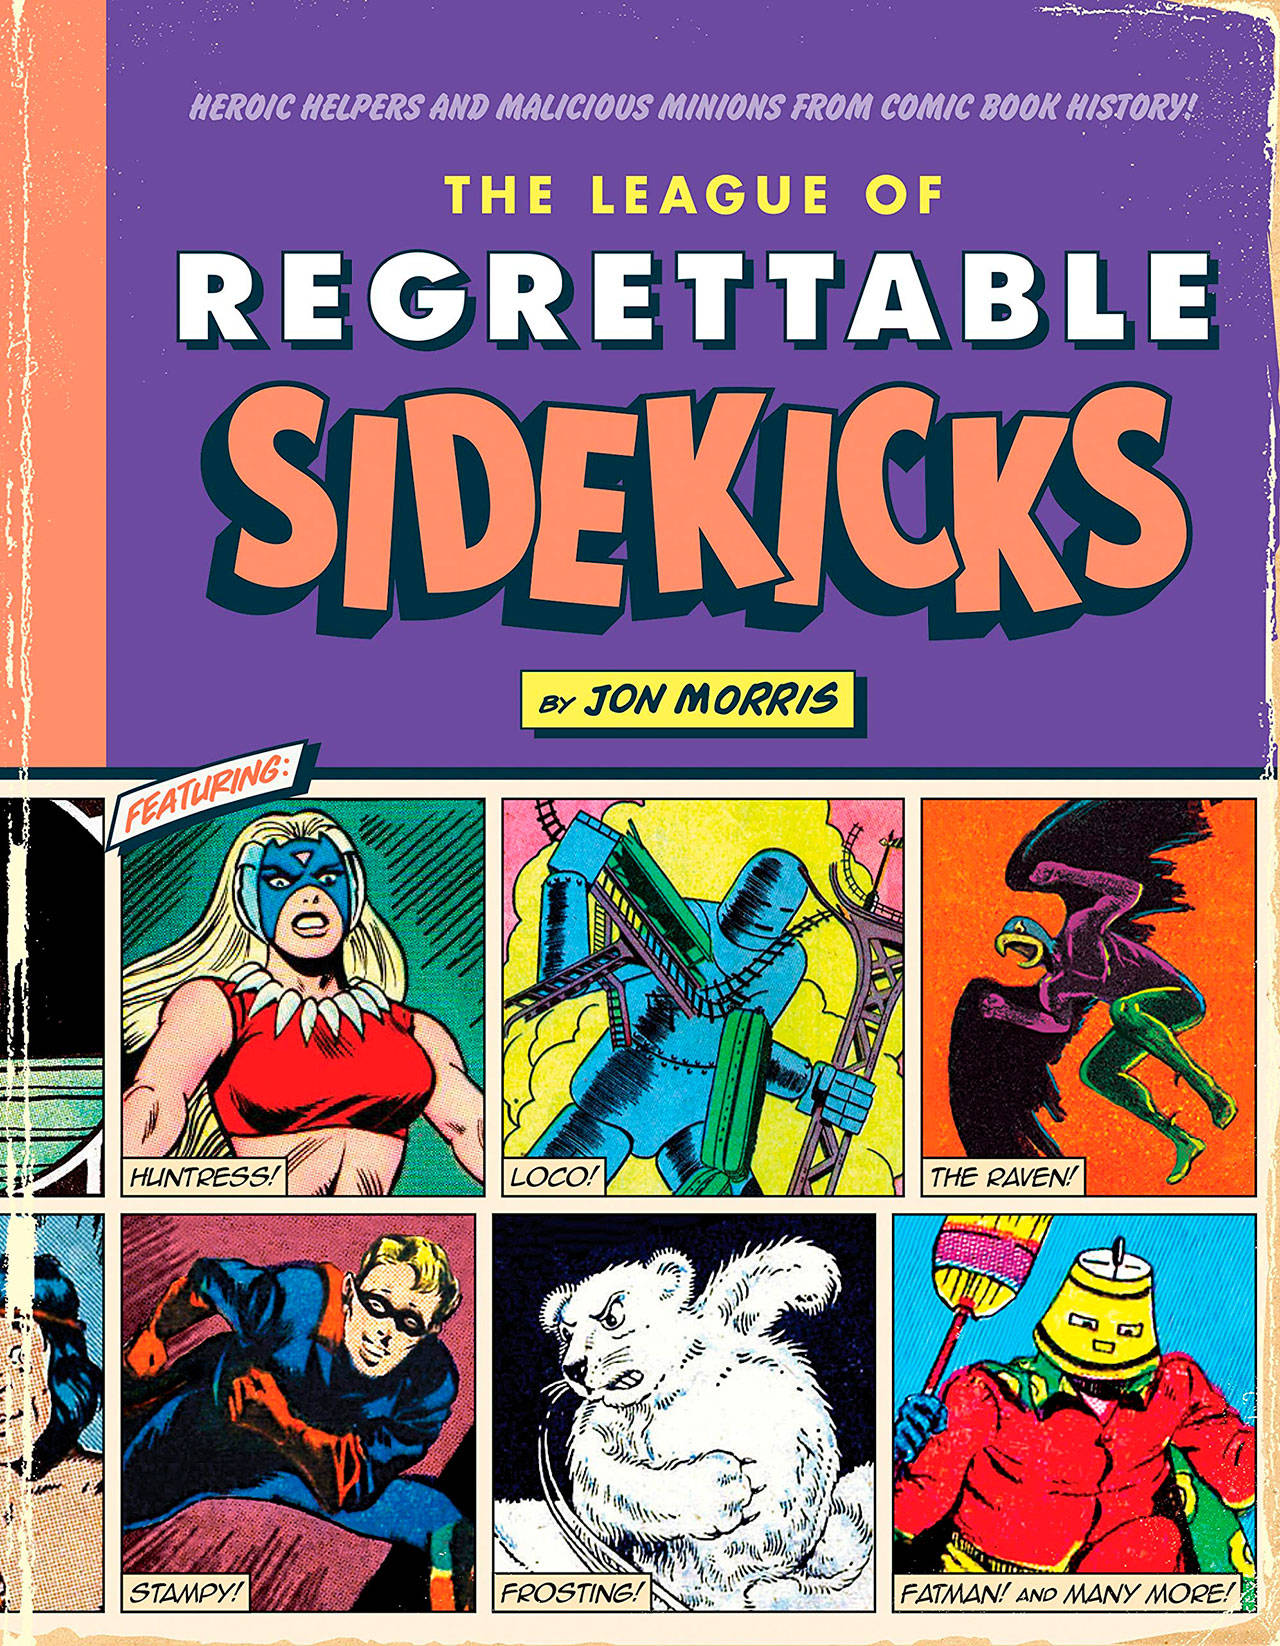 Image courtesy of Eagle Harbor Book Company | Come dressed as your favorite sidekick (or make one up) and swing into action at Eagle Harbor Book Company at 6:30 p.m. Thursday, Oct. 25 to hear author Jon Morris talk about his new book “The League of Regrettable Sidekicks.”